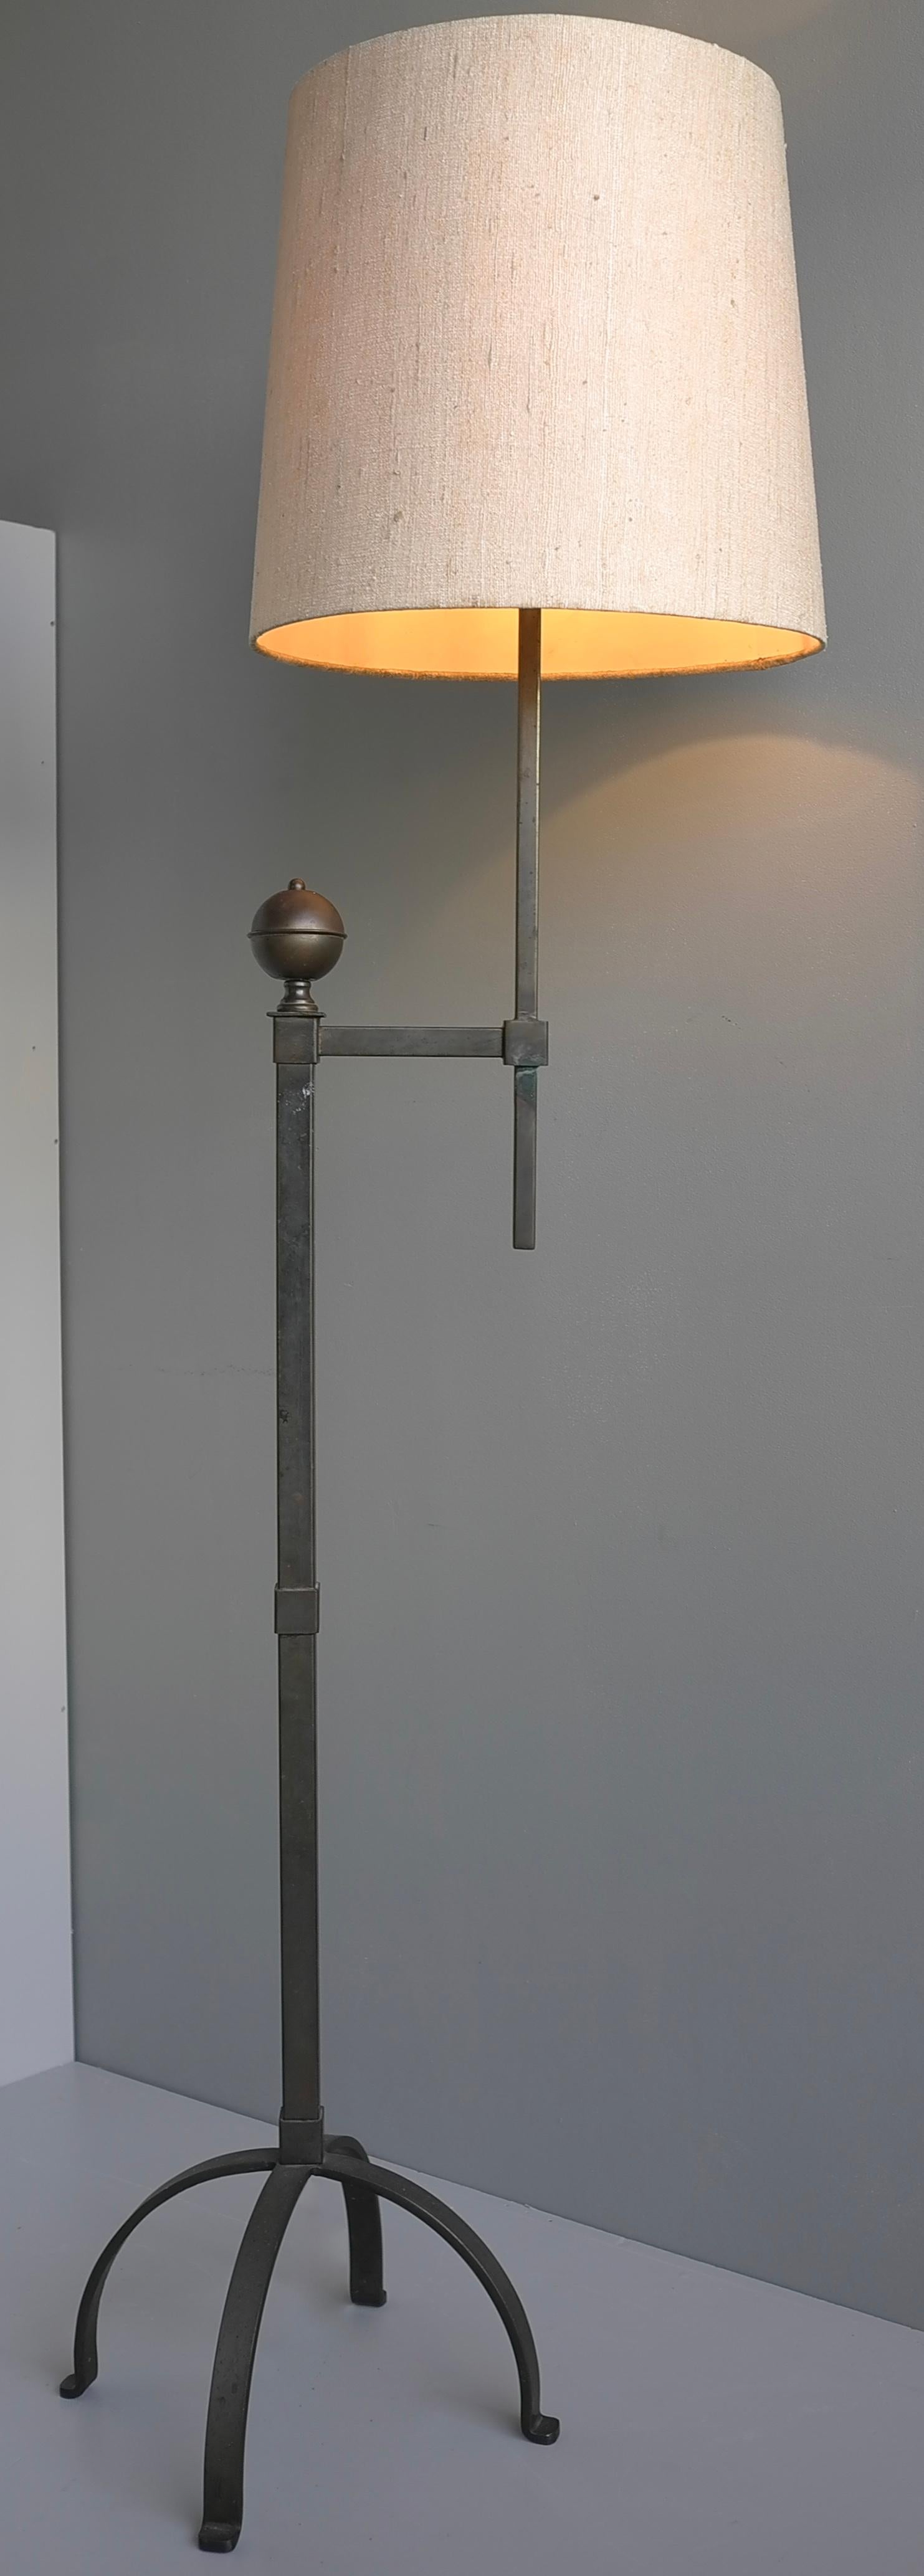 French Mid-Century Modern Copper and steel Patina Floor lamp 1950's For Sale 4